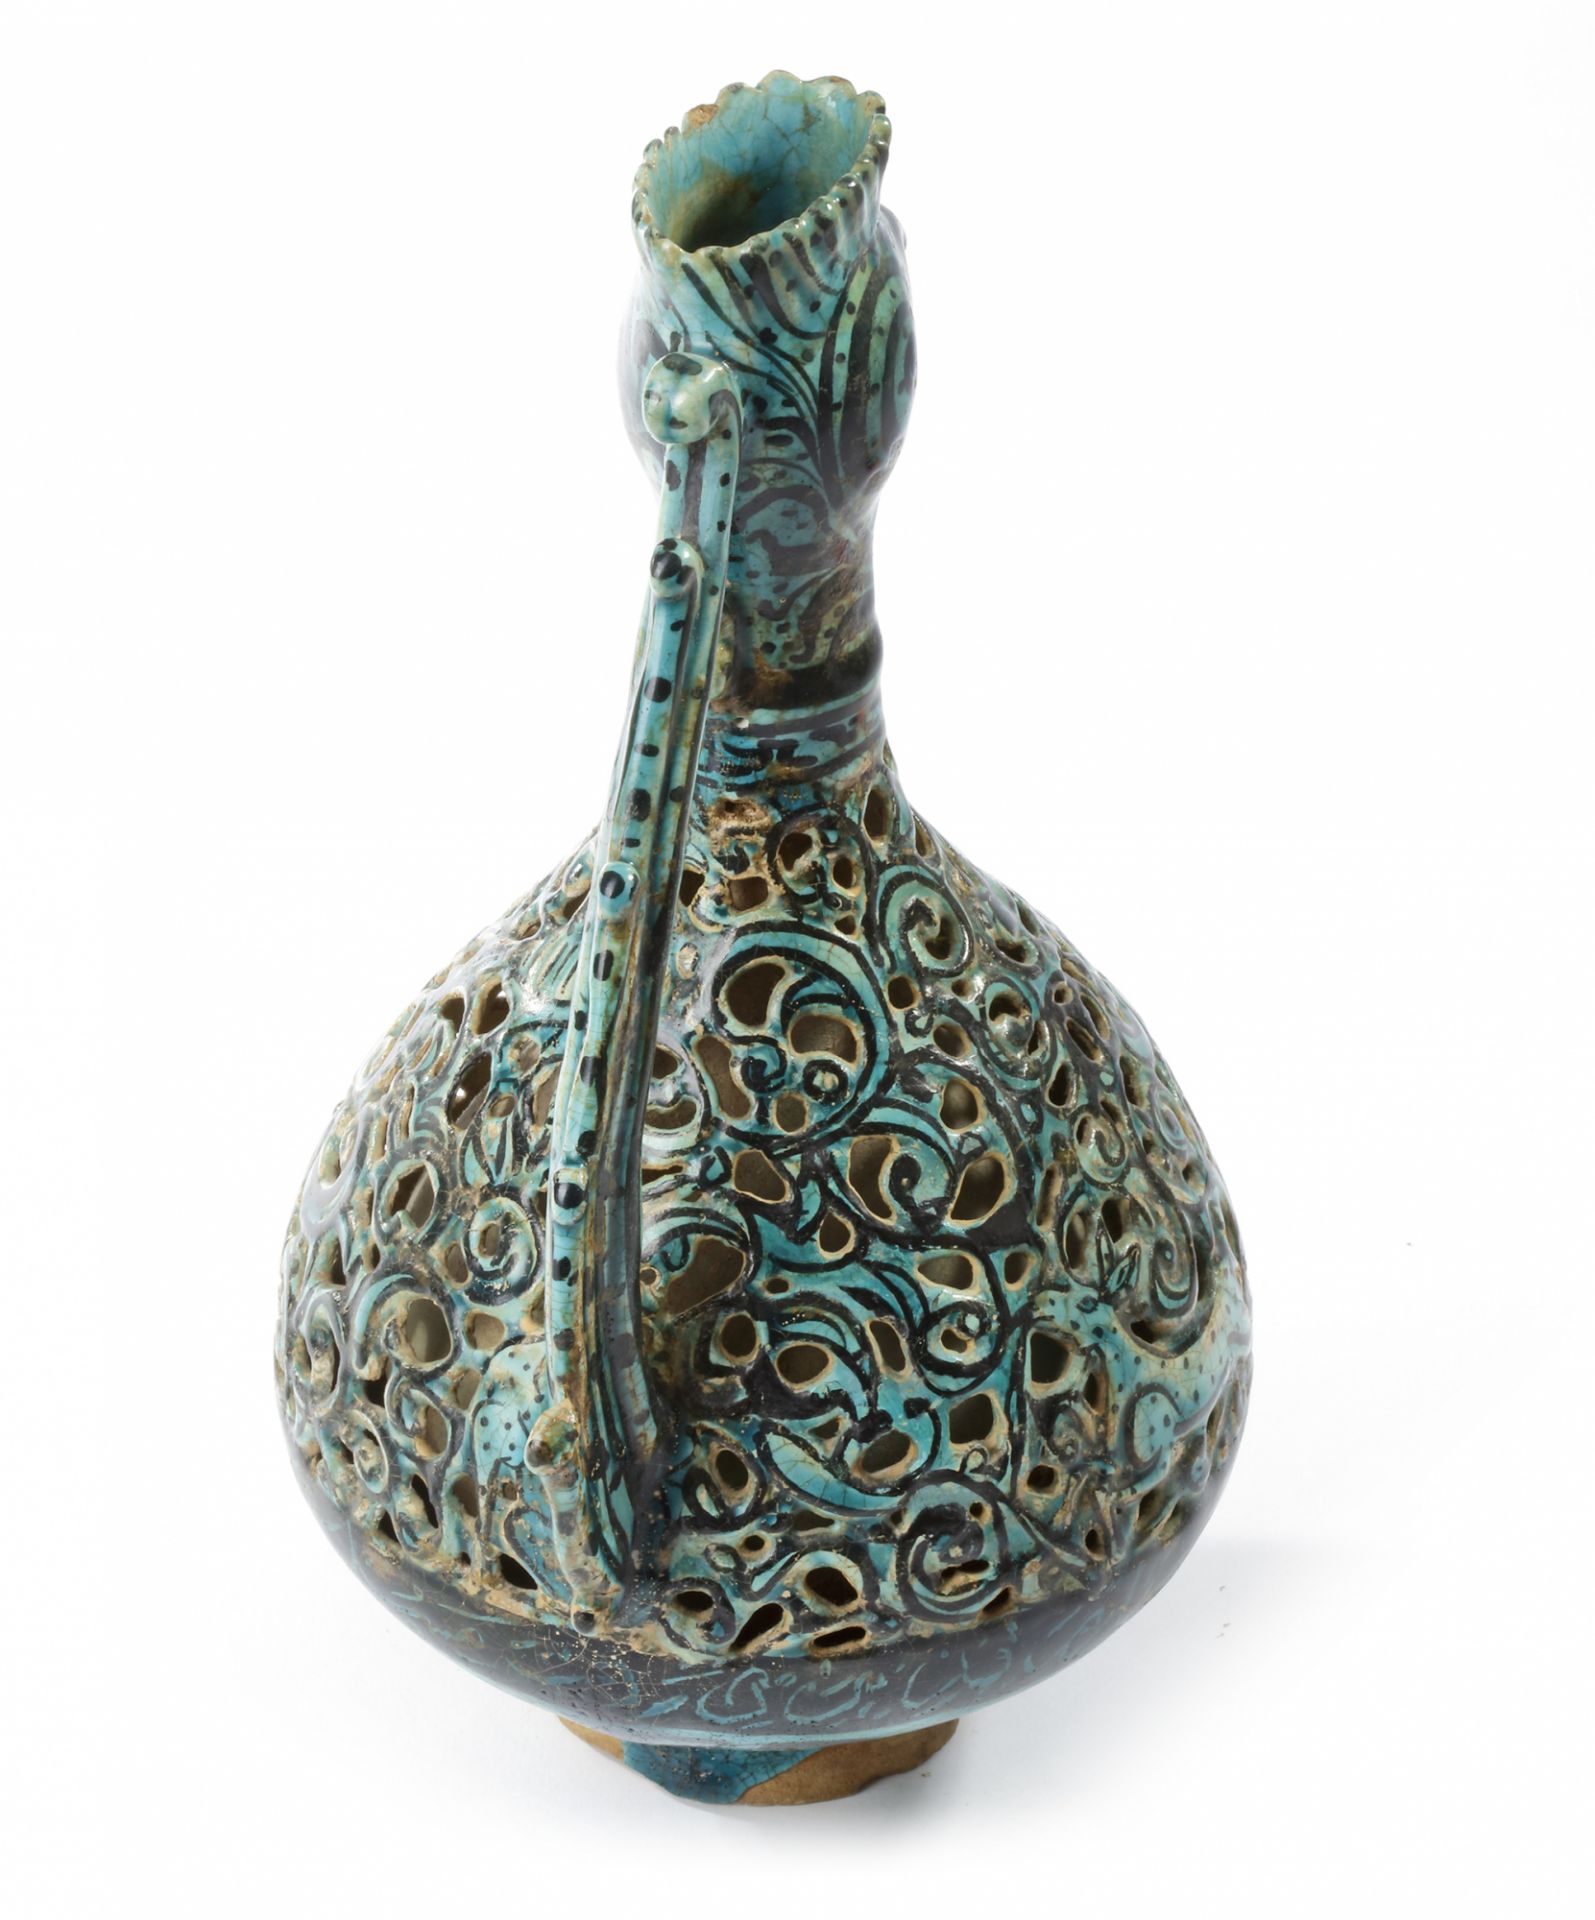 A RARE FRITWARE OPENWORK DECORATED RETICULATED EWER WITH ROOSTER HEAD, PERSIA, 13TH CENTURY - Image 11 of 16